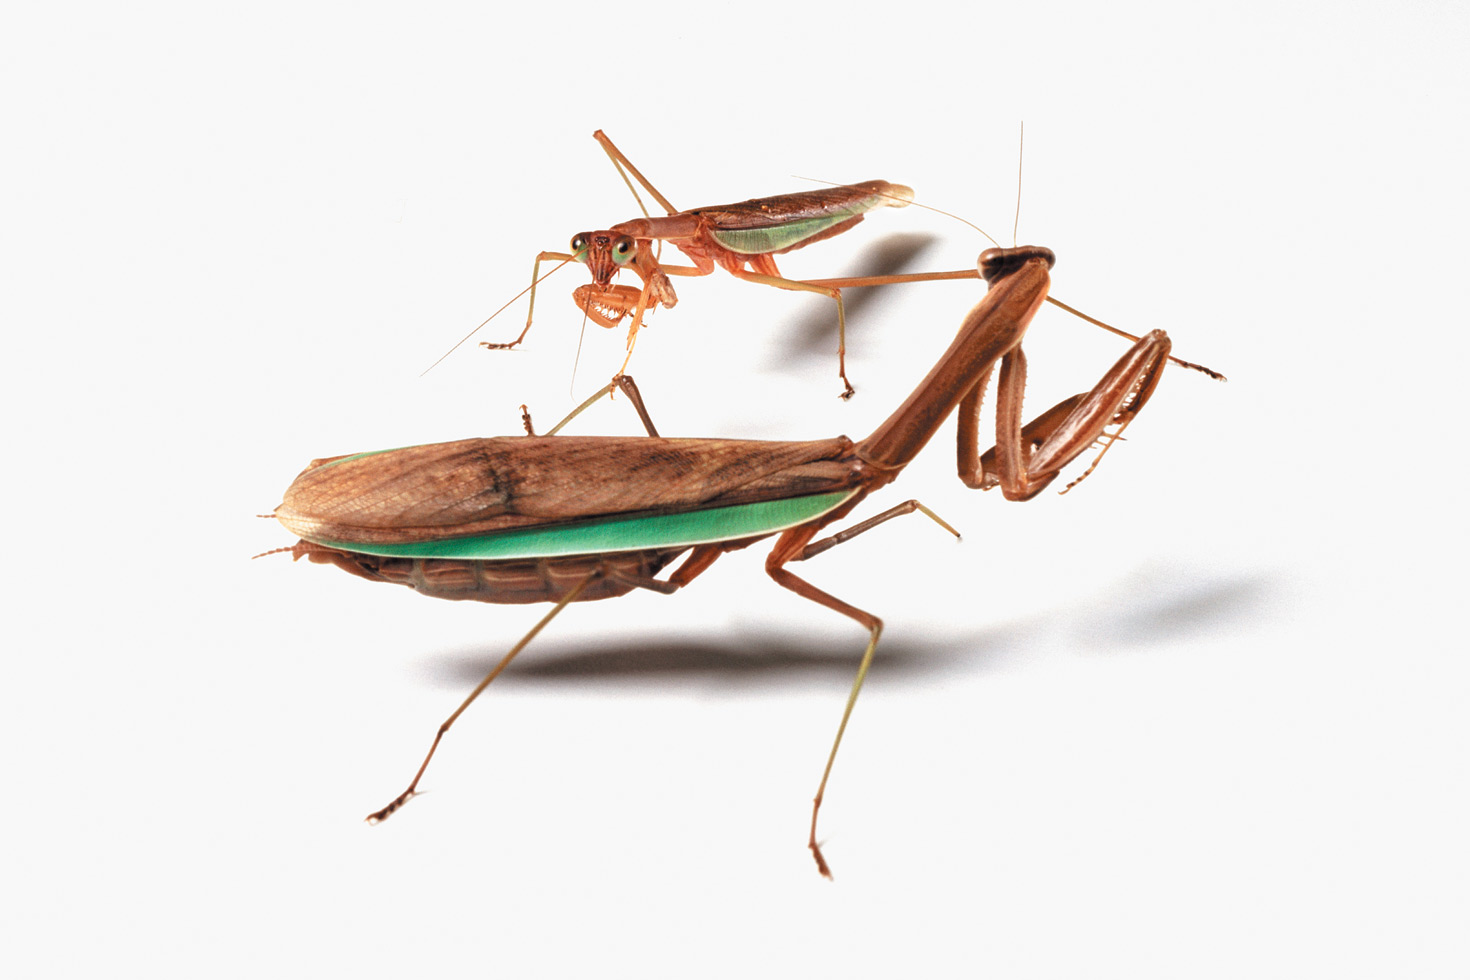 No such thing as a quickie for mantises. Catherine had been studying this pair; he cautiously approached her before they proceeded to mate for hours.